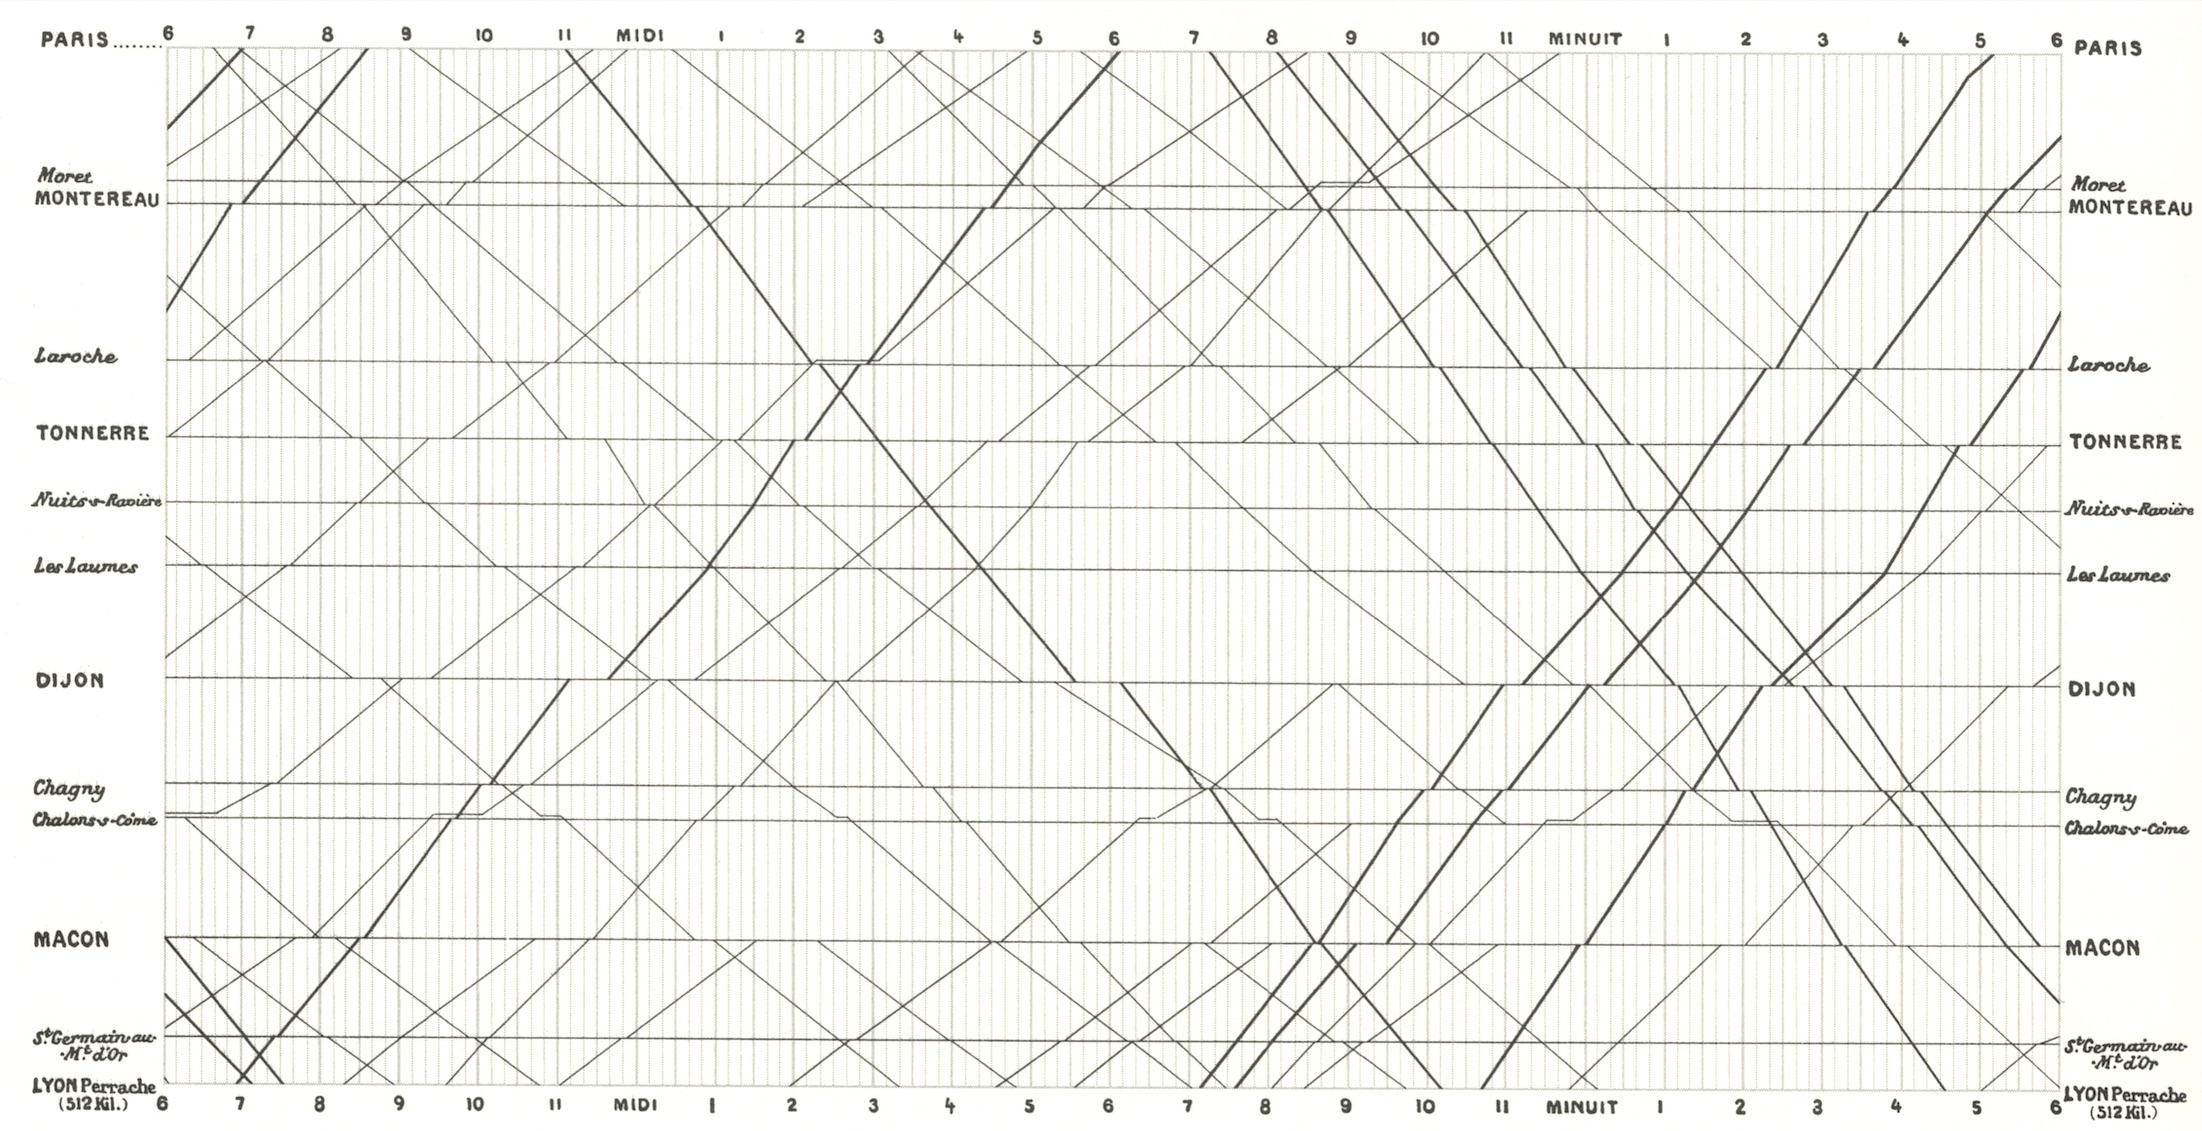 A visualization of train schedules from Paris to Lyon. The horizontal axis is time, and the vertical axis is space. The distance between stops on the chart reflects how far apart they are in the real world.